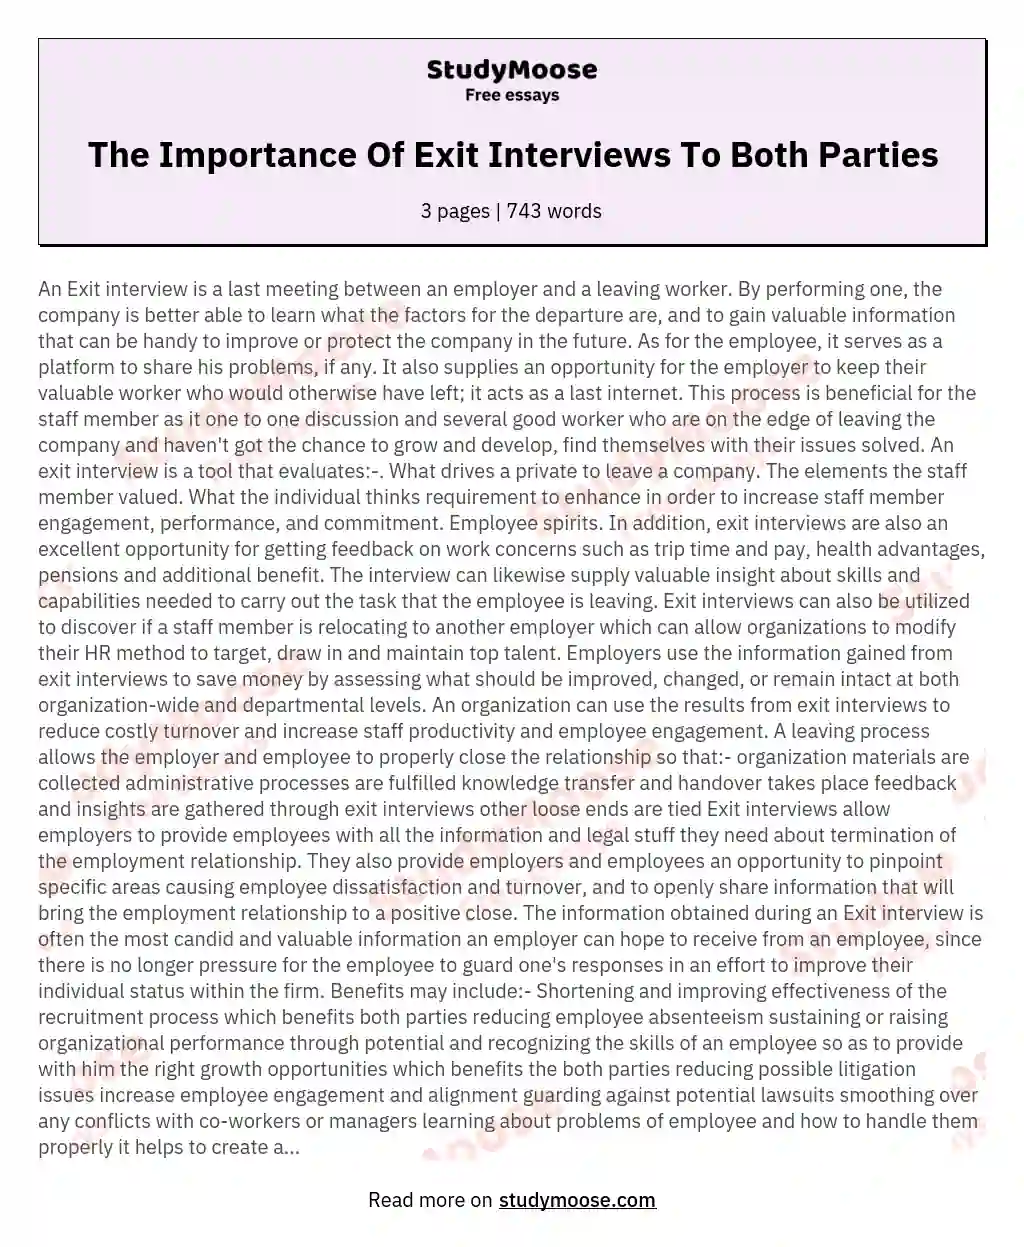 The Importance Of Exit Interviews To Both Parties